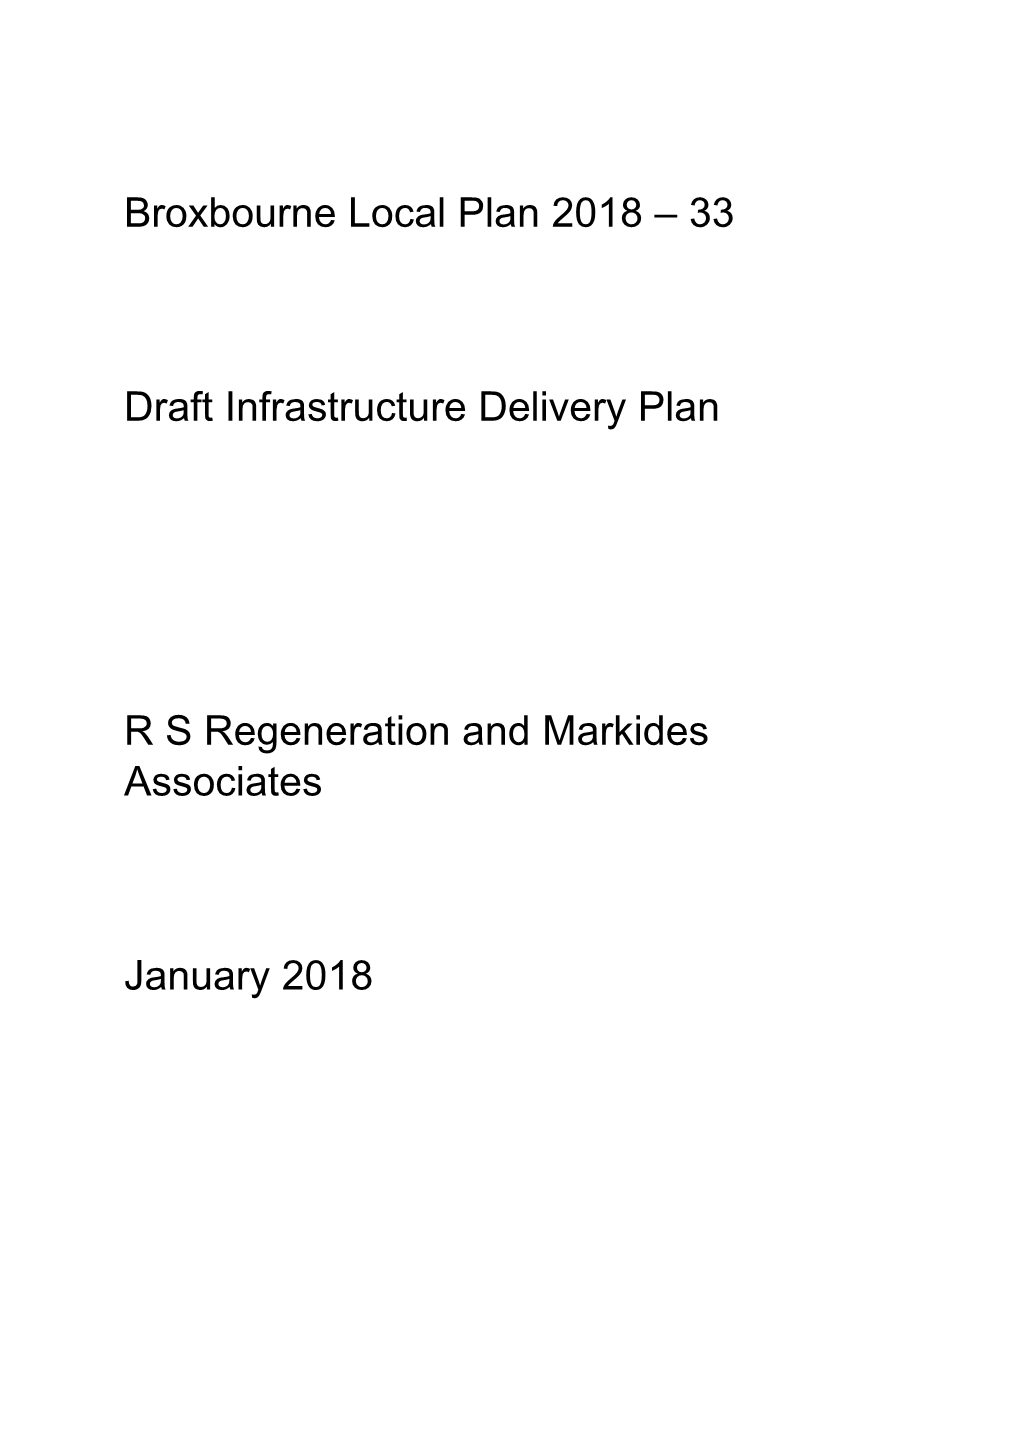 33 Draft Infrastructure Delivery Plan RS Regeneration and Markides